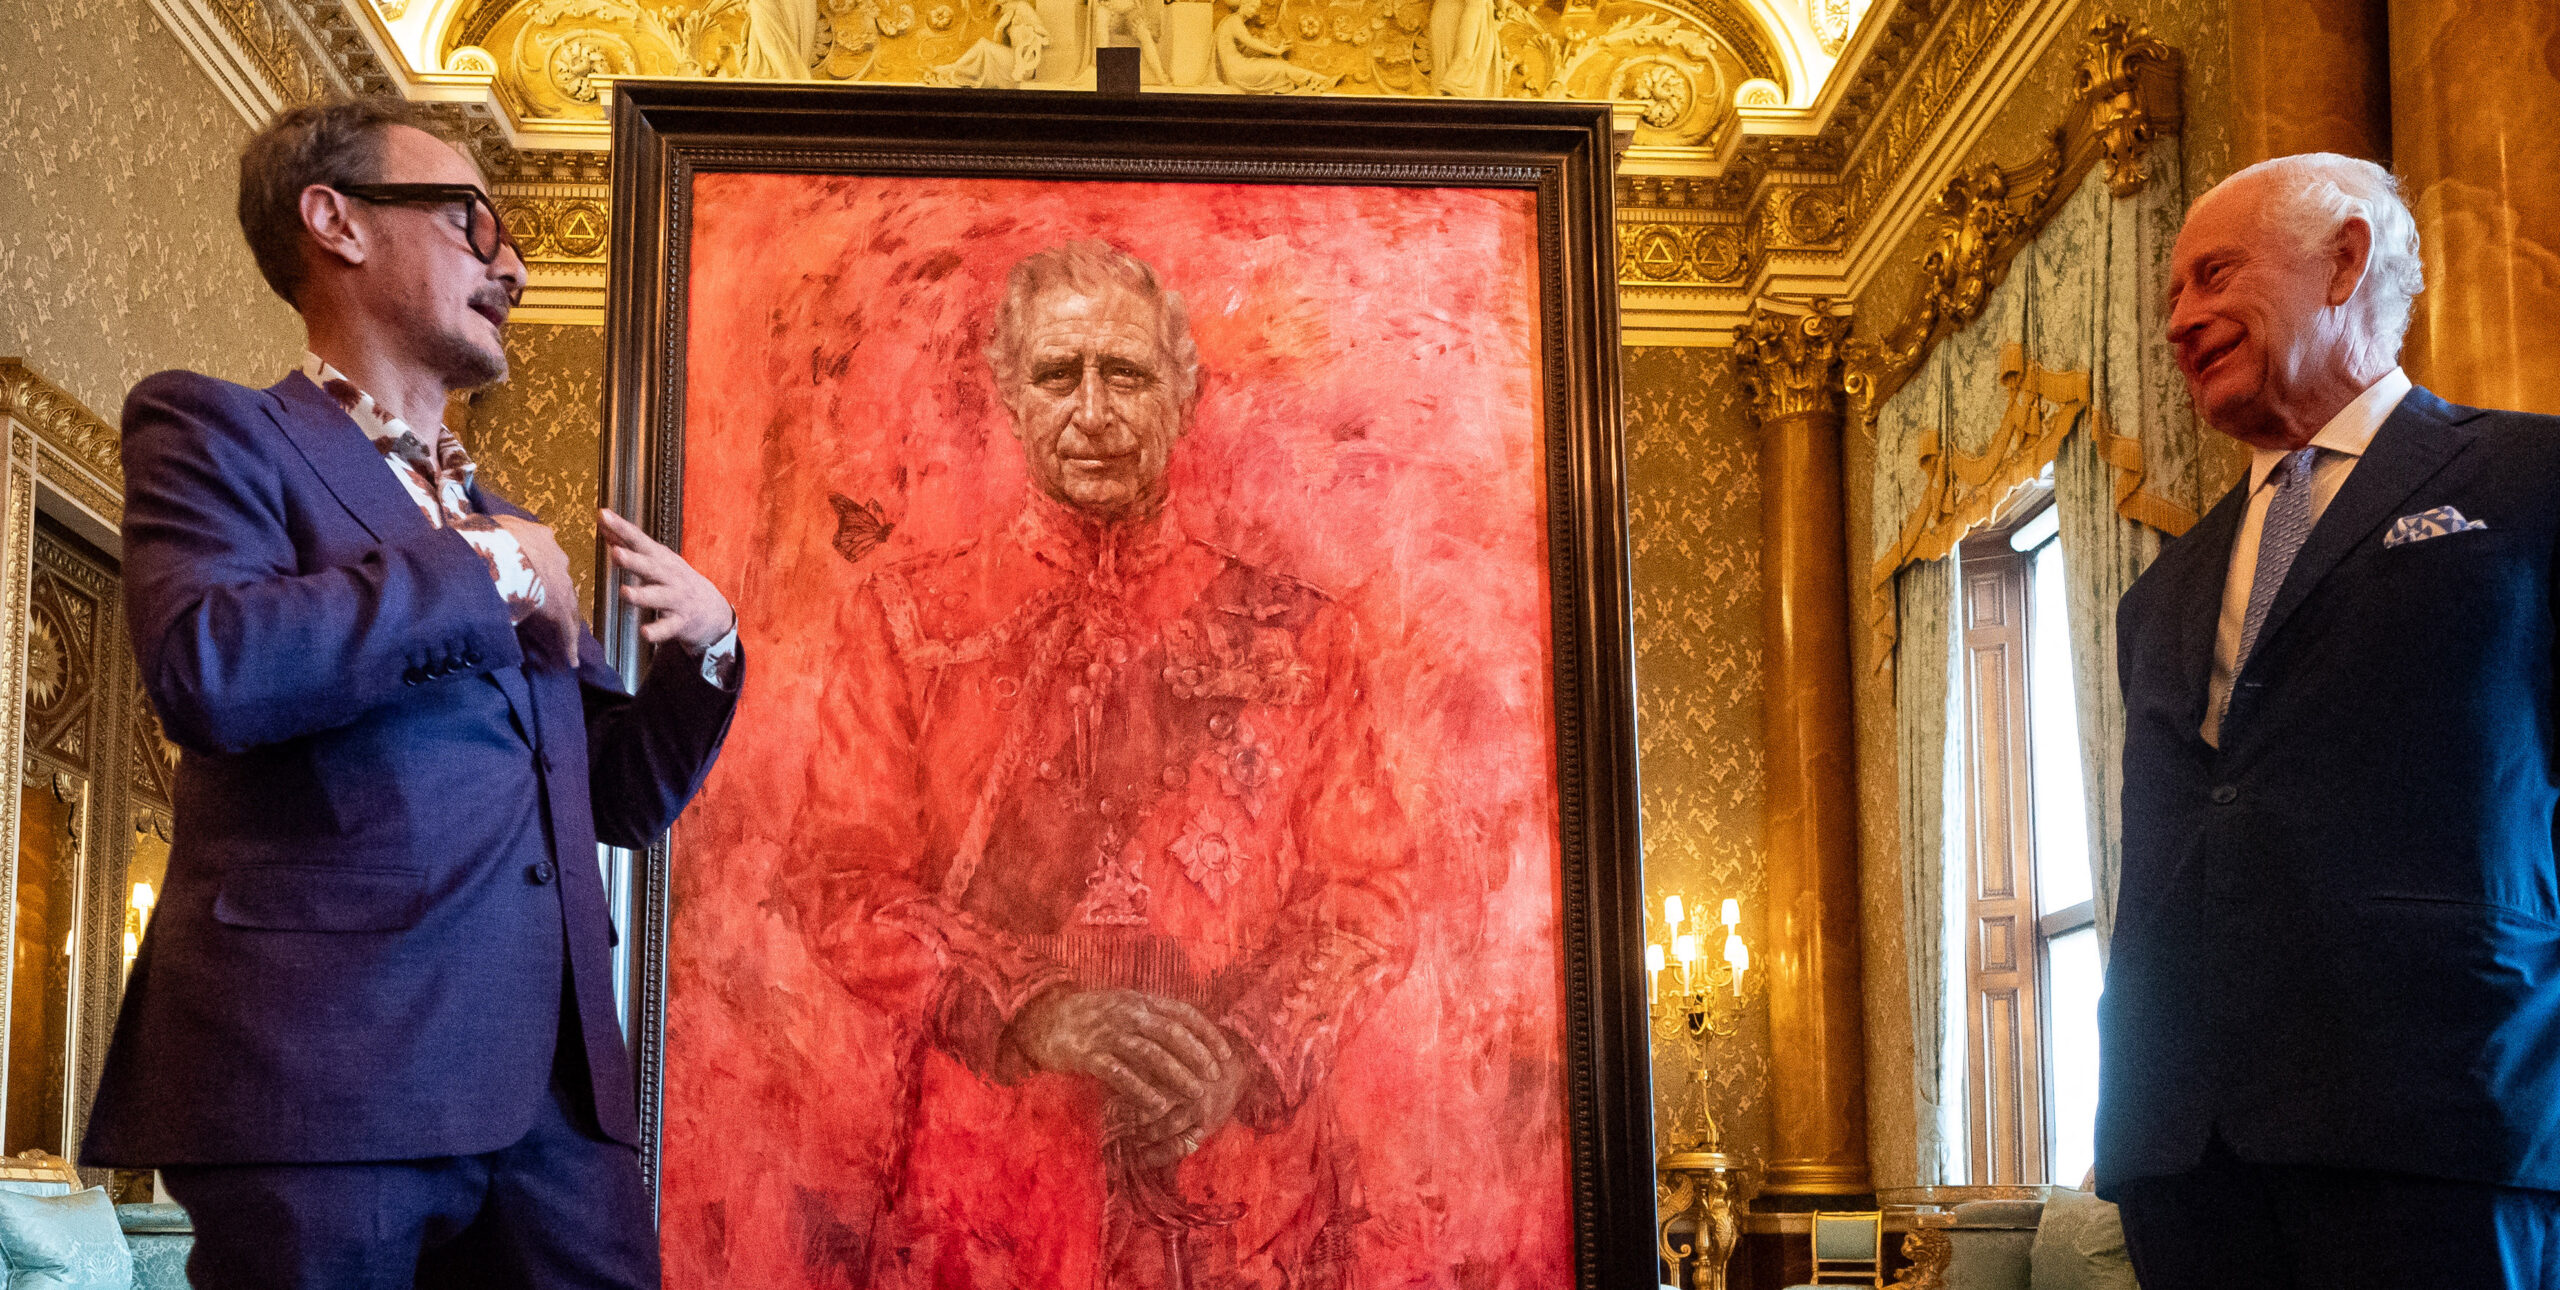 Initial Portrait of King Charles III Ridiculed Online: Criticized for Resemblance to Damnation